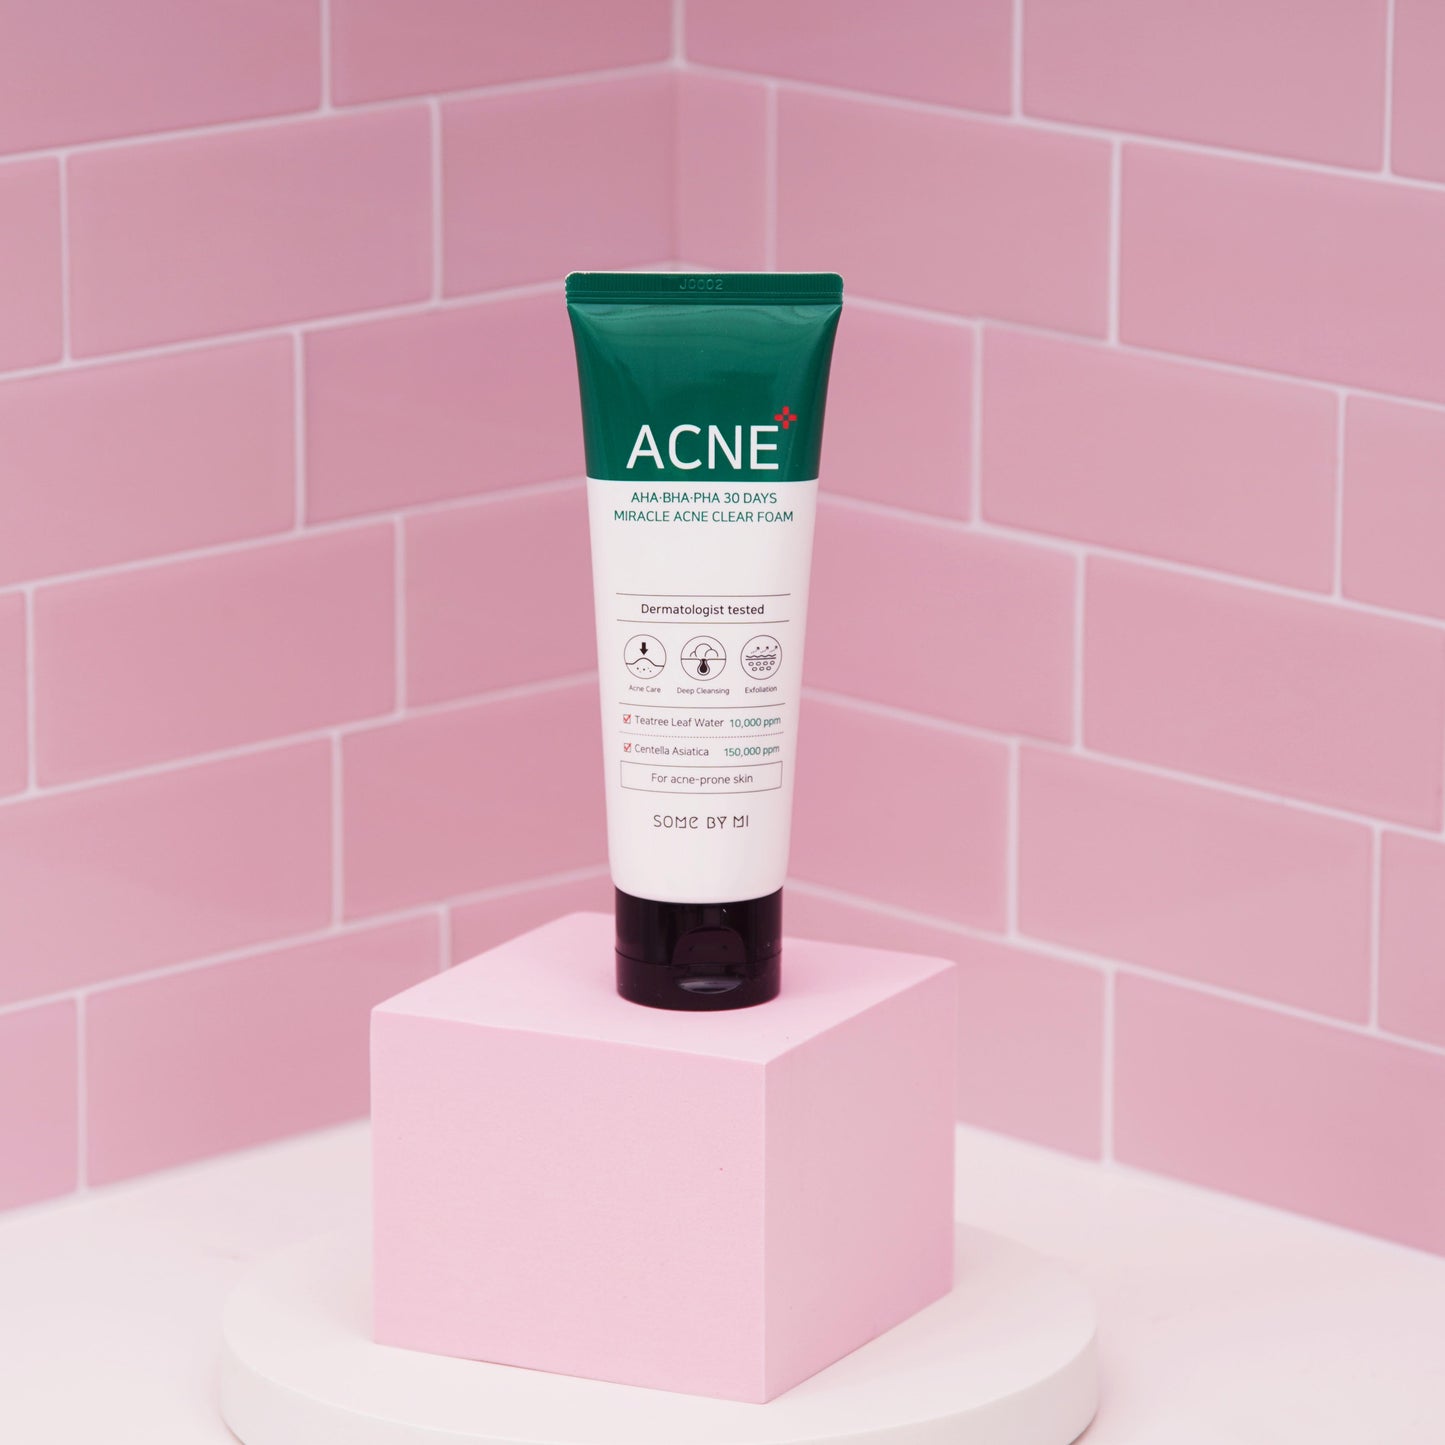 SOMEBYMI: MIRACLE ACNE CLEAR FOAM